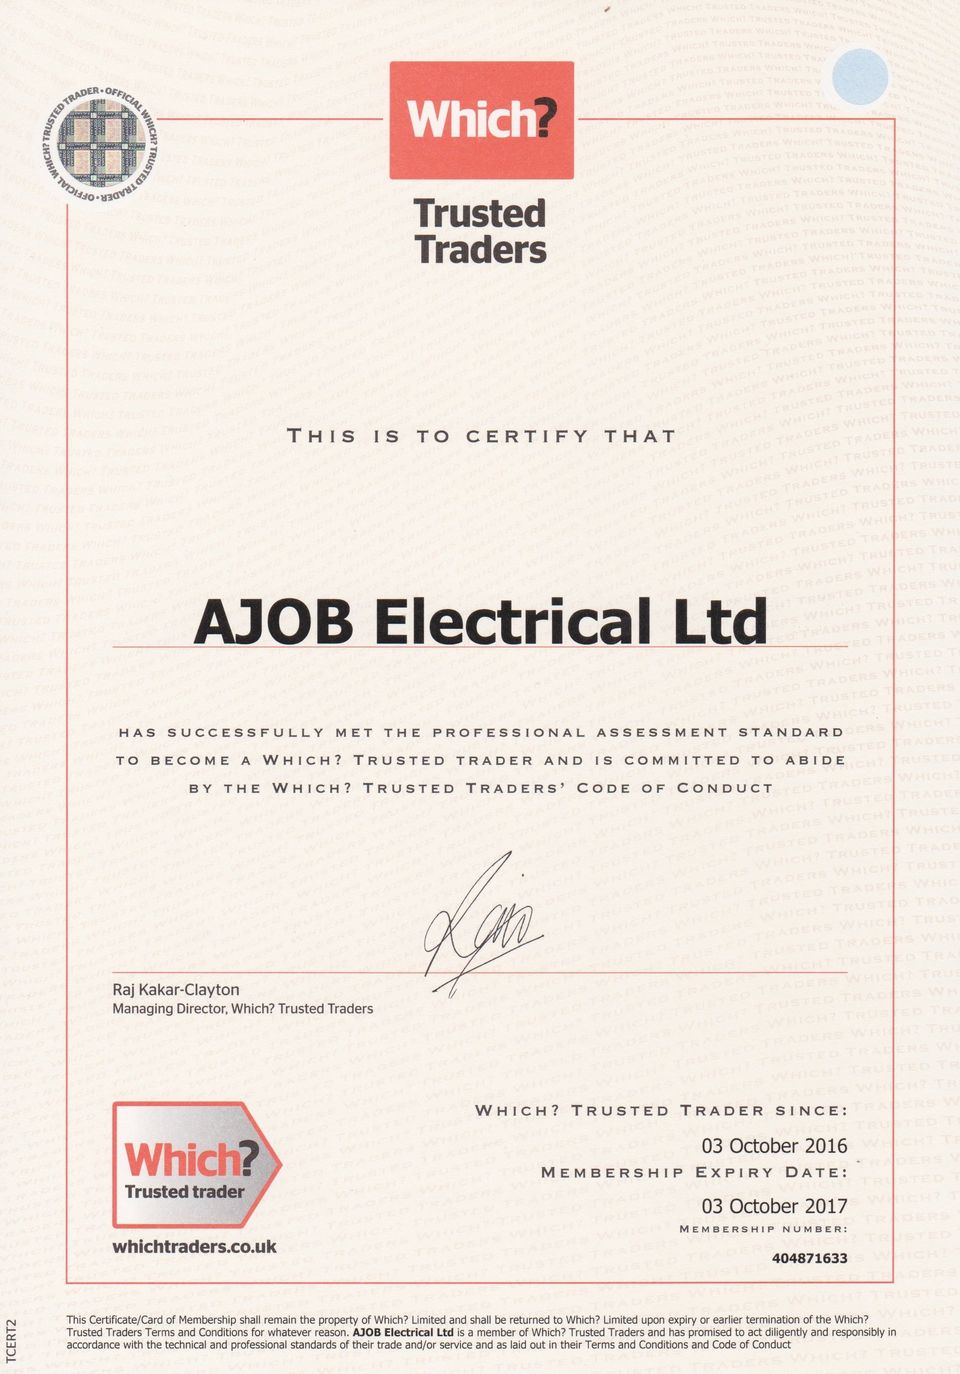 AJOB Electrical Ltd Electrician in Leeds & Which? Trusted Traders